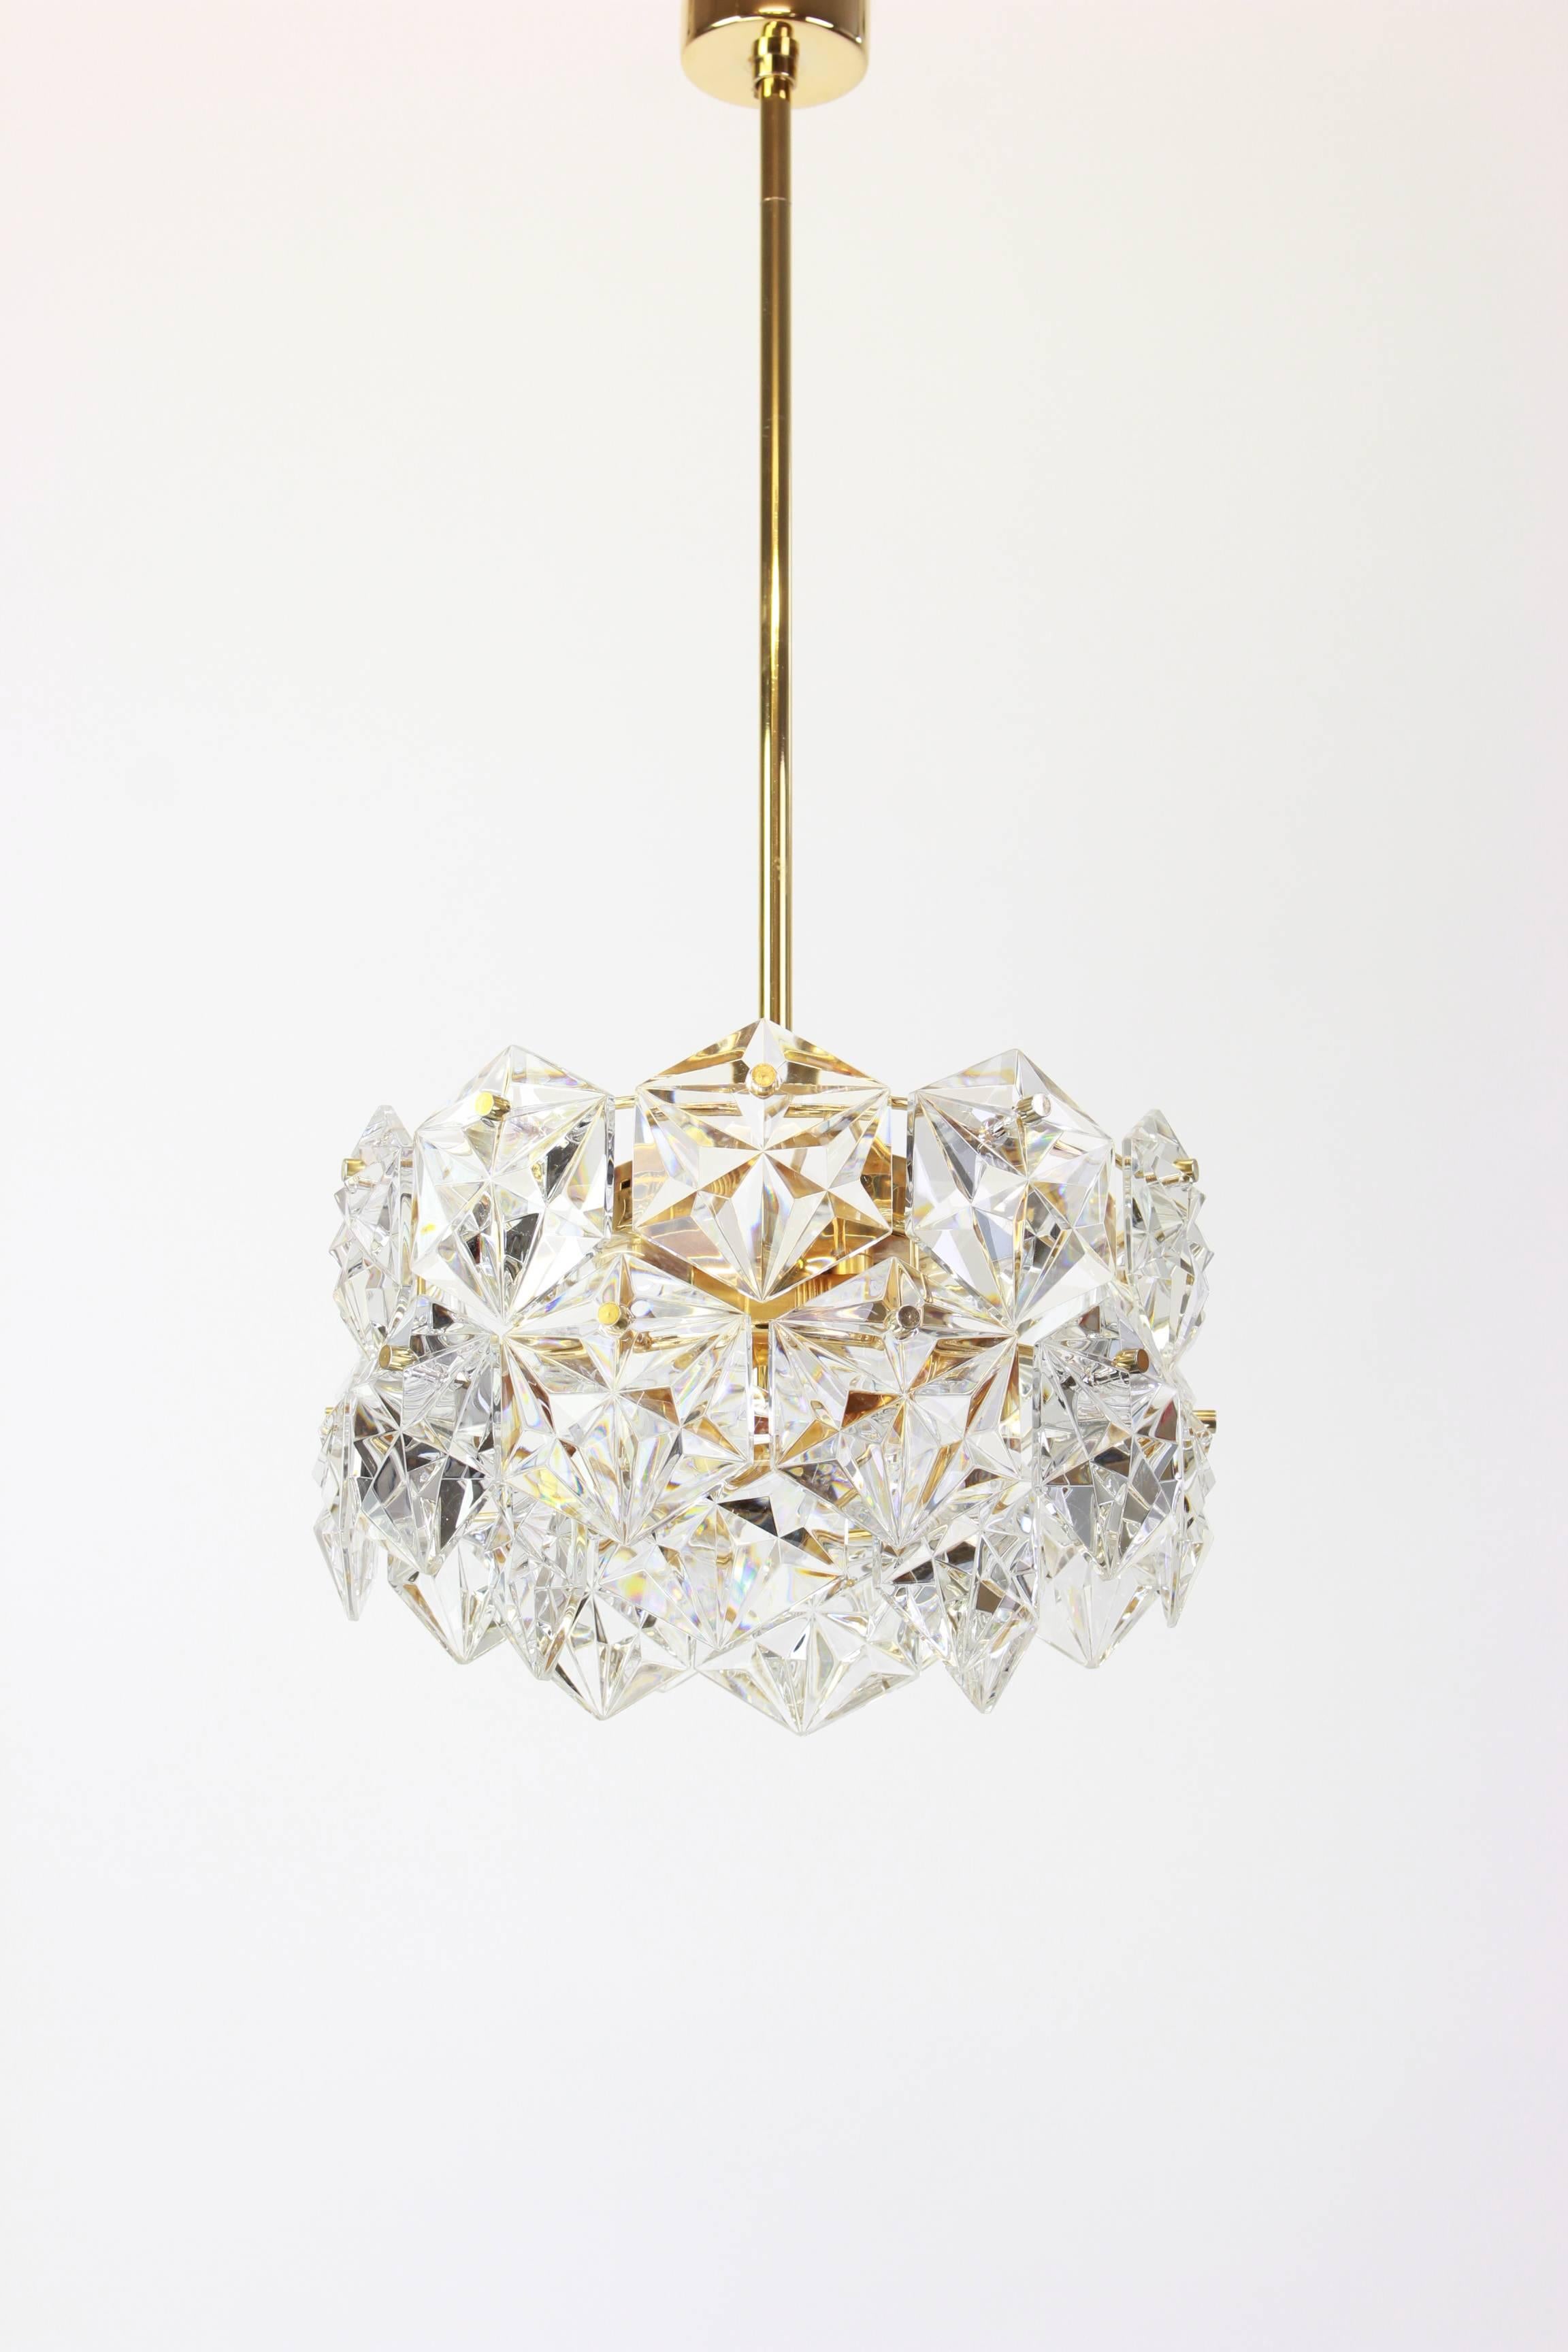 A stunning three-tier chandelier by Kinkeldey, Germany, manufactured in circa 1970-1979. A handmade and high quality piece. The ceiling fixture and the frame are made of brass and has three rings with lots of facetted crystal glass